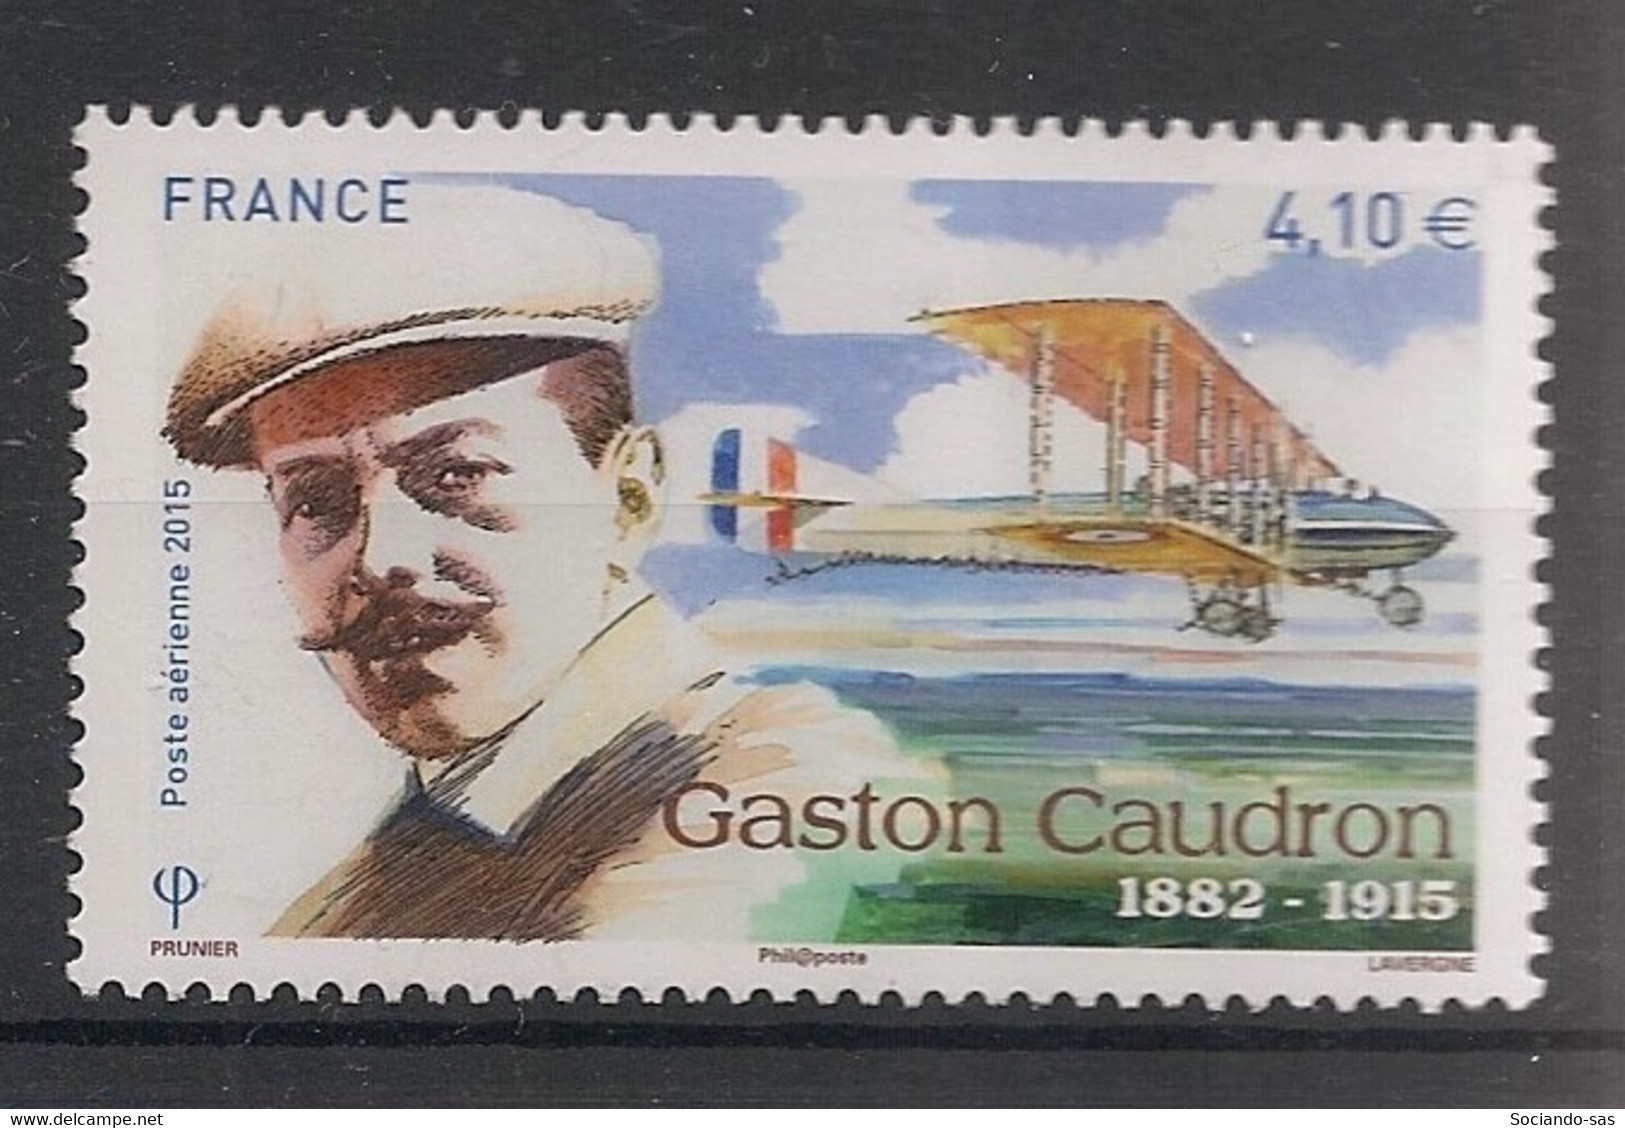 FRANCE - 2015 - Poste Aérienne PA N°YT. 79 - Gaston Caudron - Neuf Luxe ** / MNH / Postfrisch - 1960-.... Mint/hinged